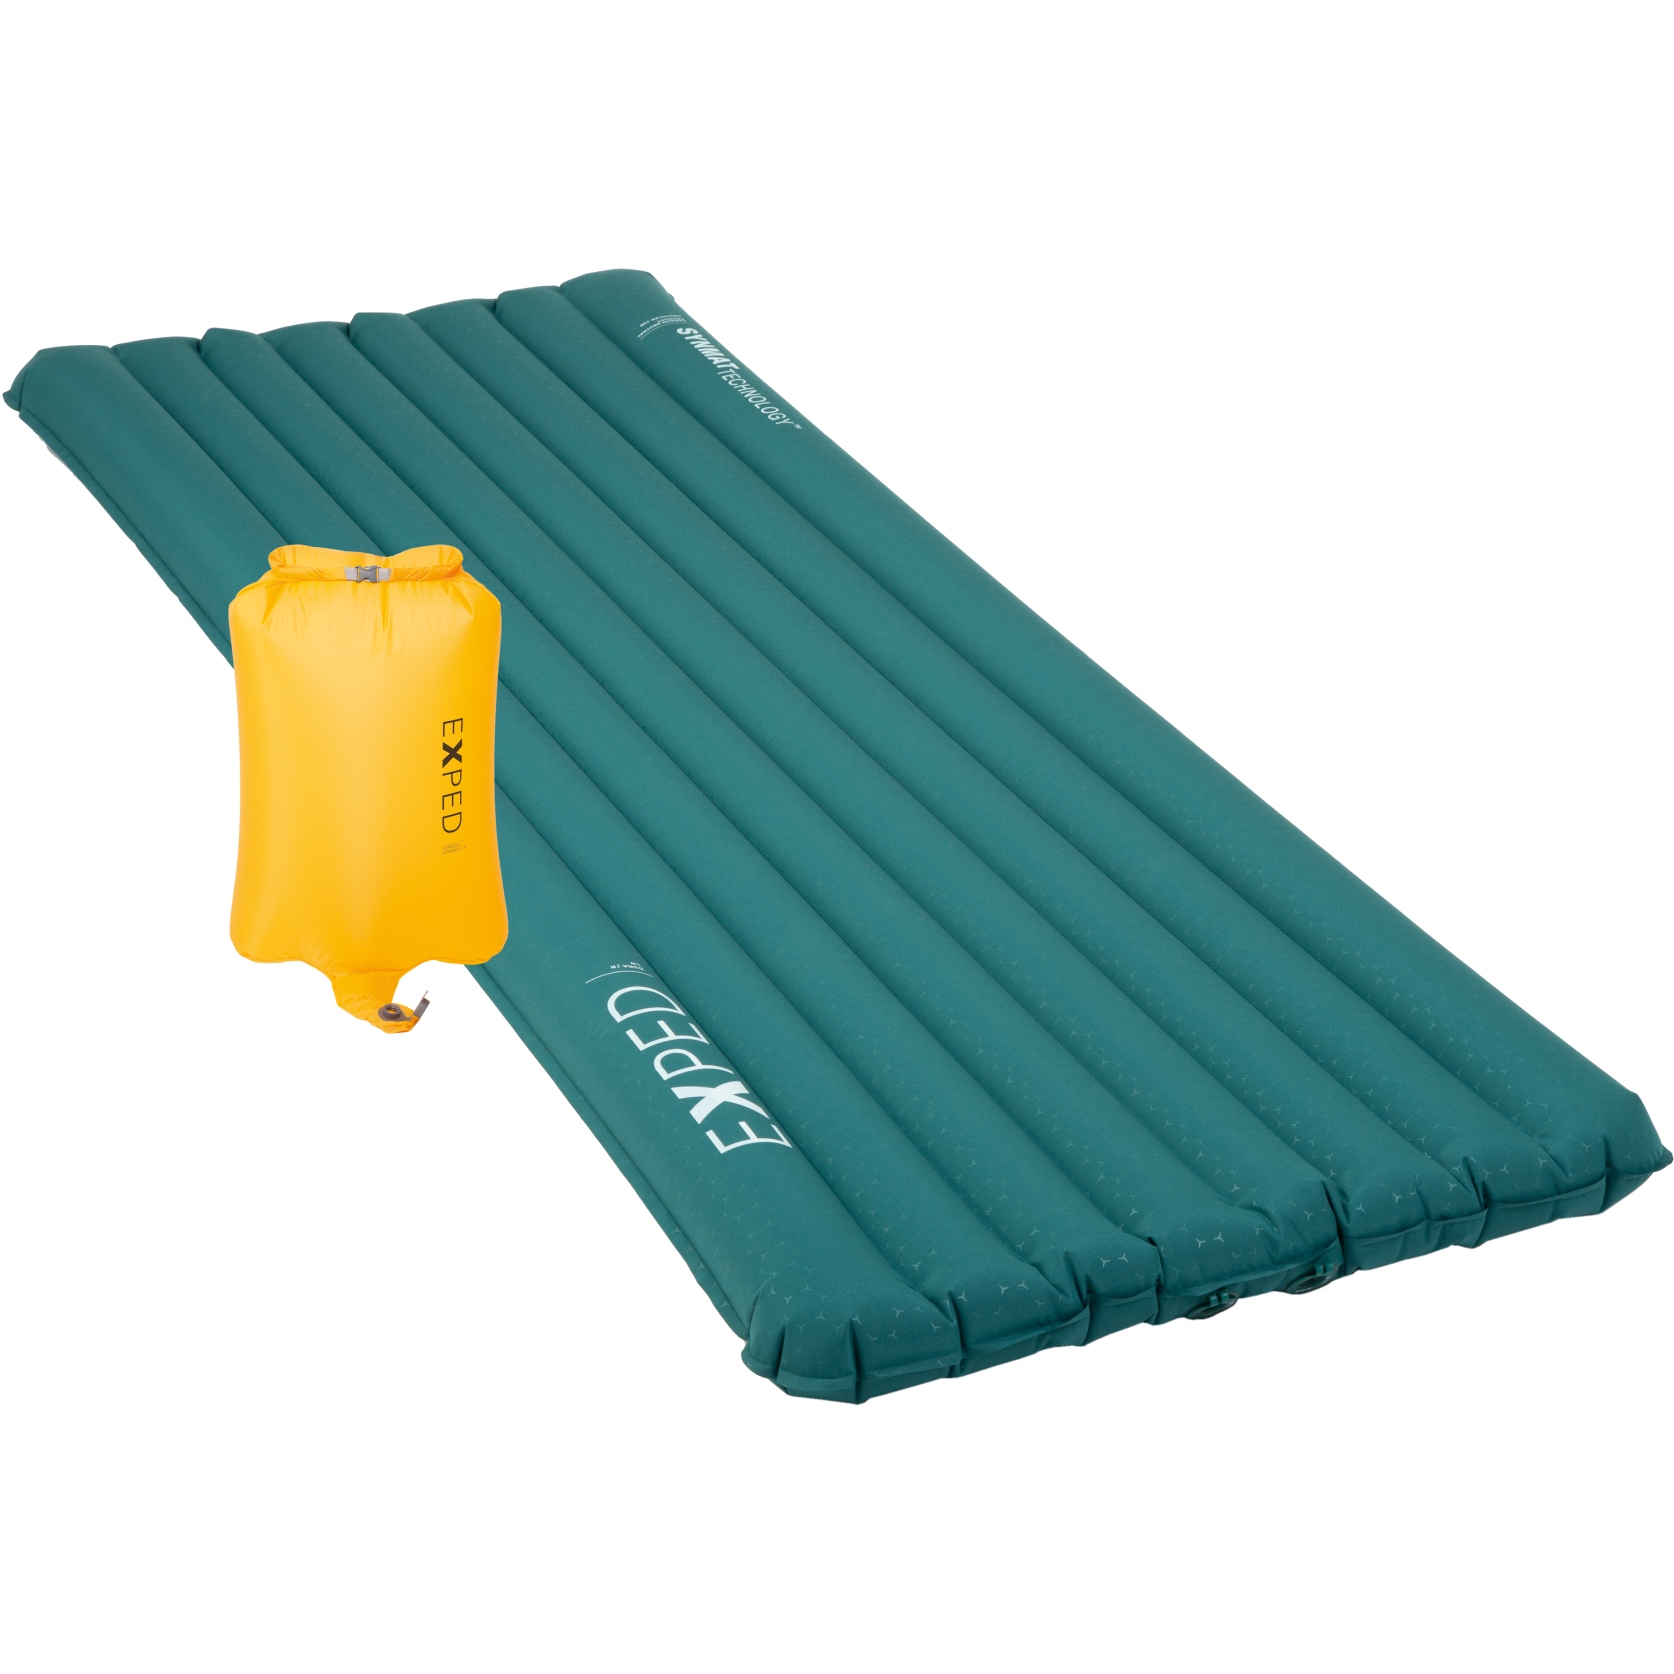 Picture of Exped Dura 3R Sleeping Mat - MW - cypress